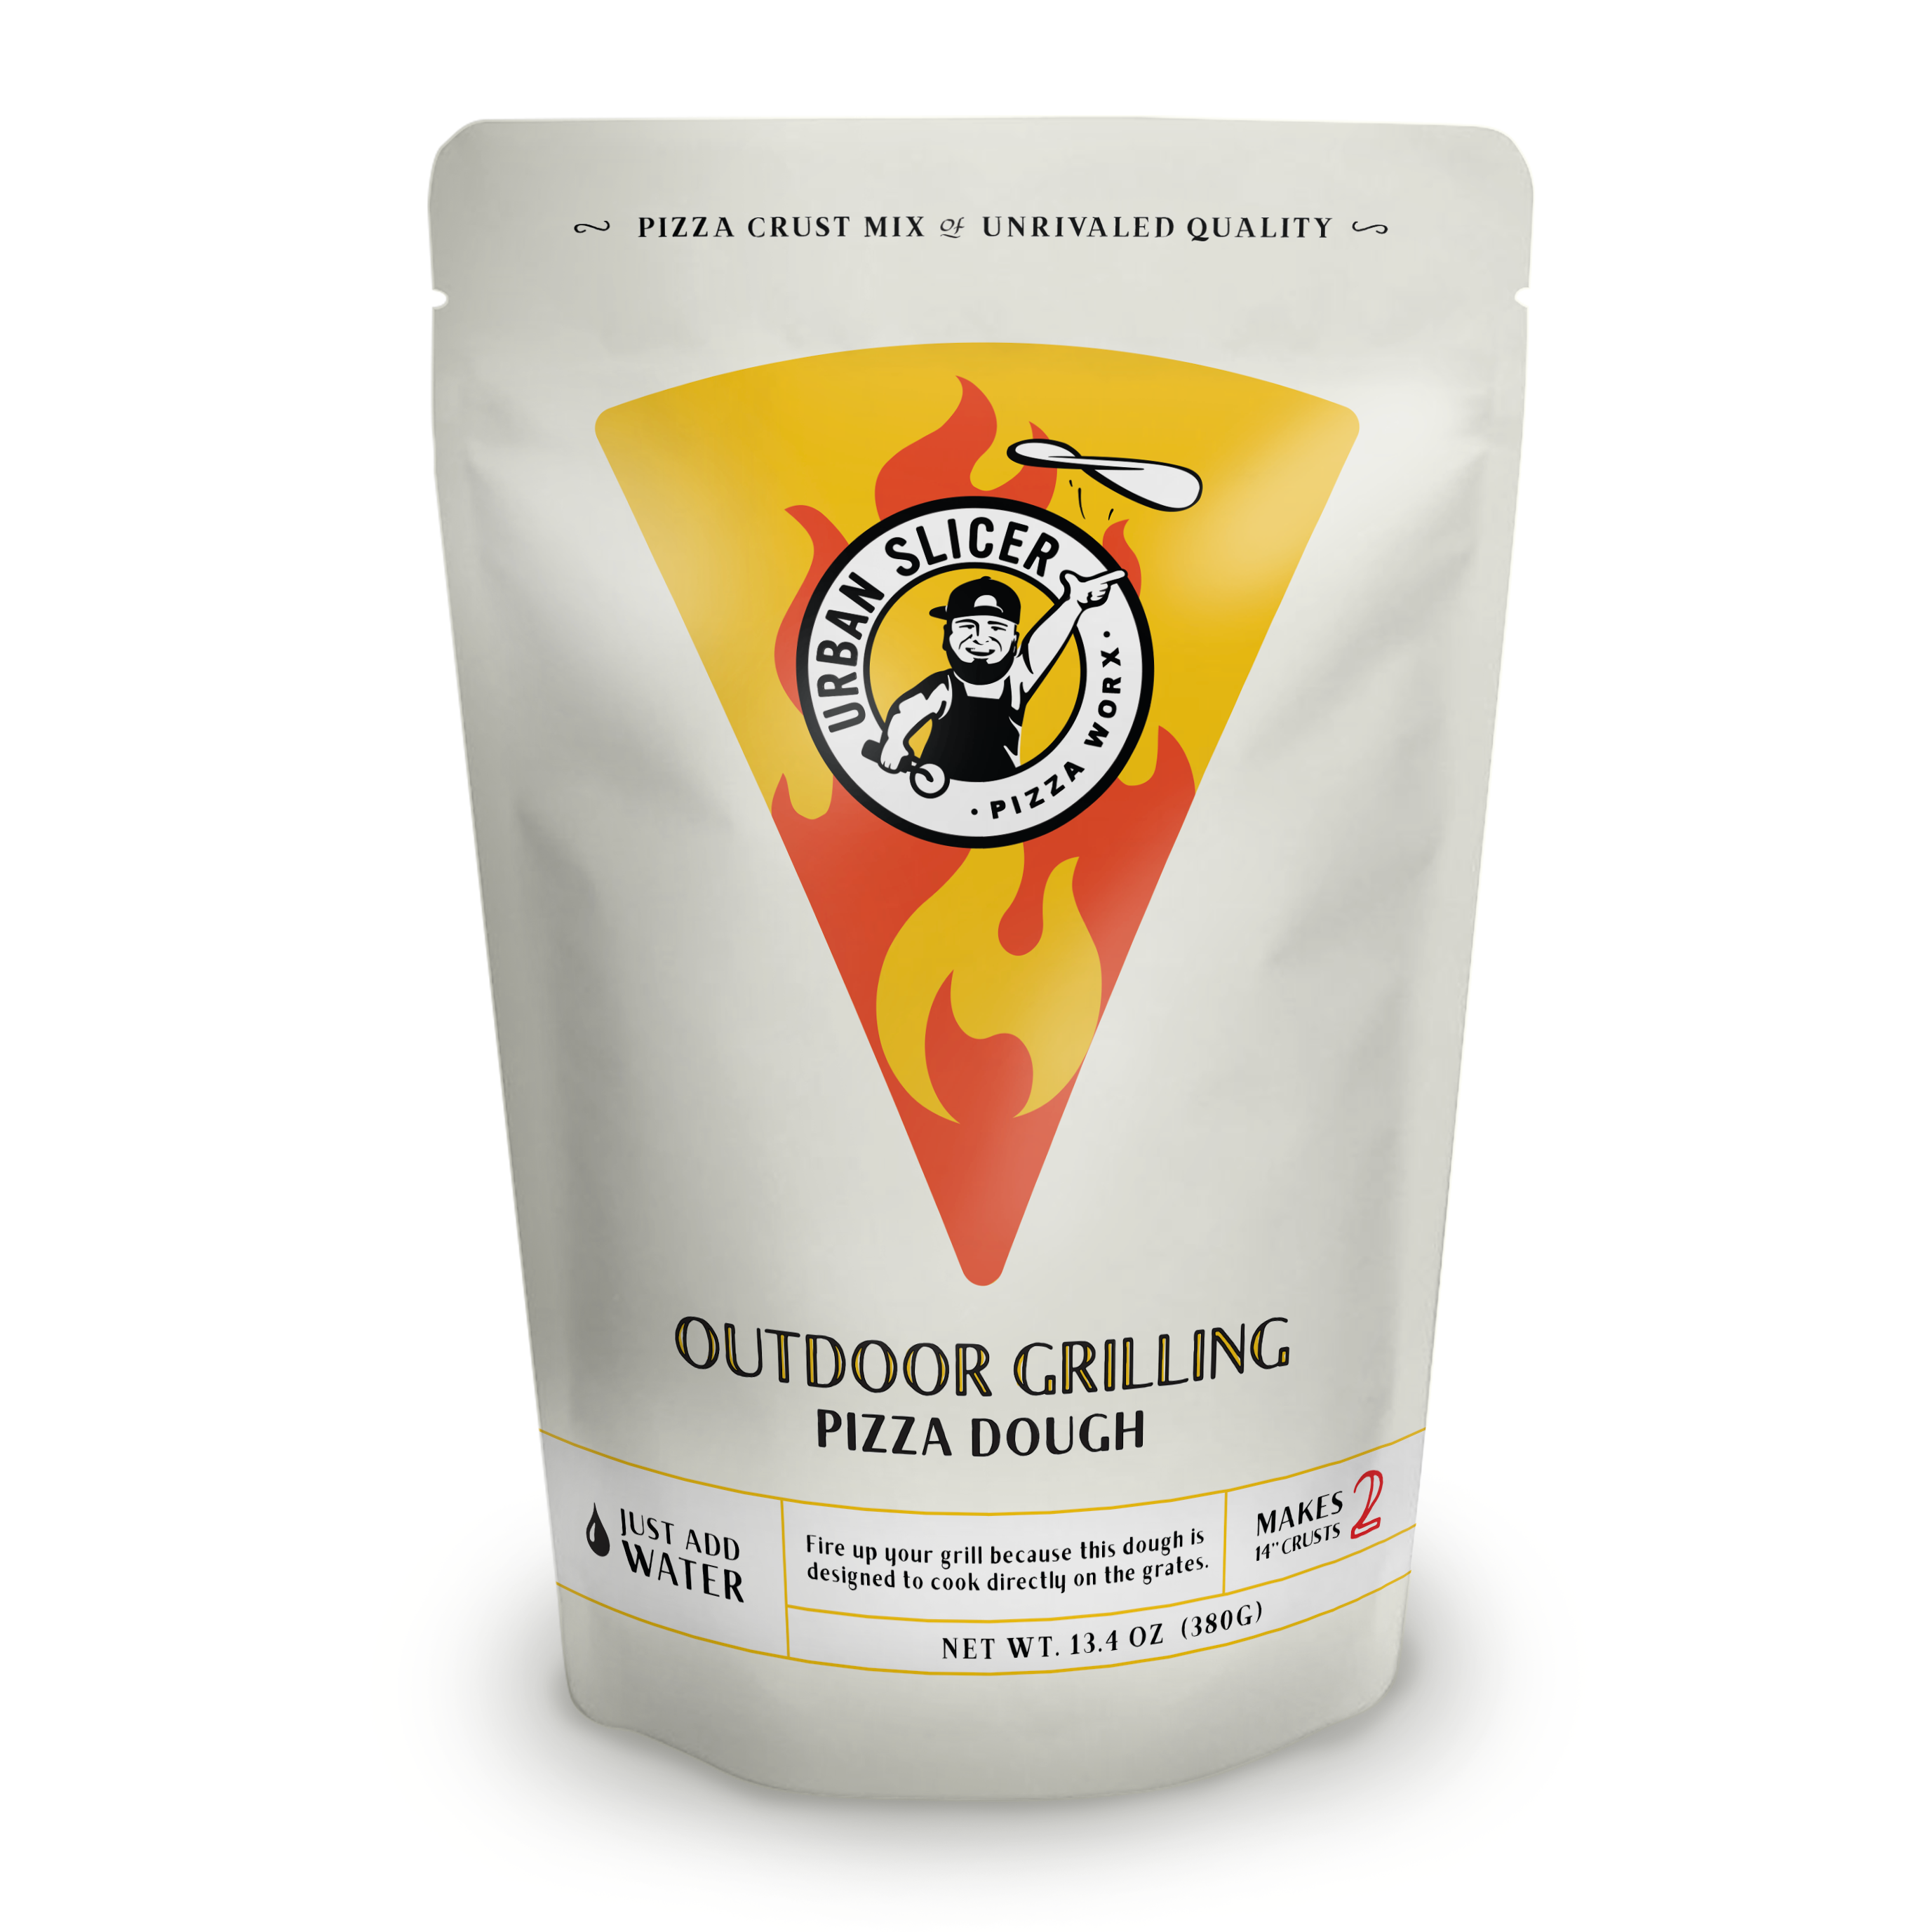 Urban Slicer Grilling Pizza Dough Packaging